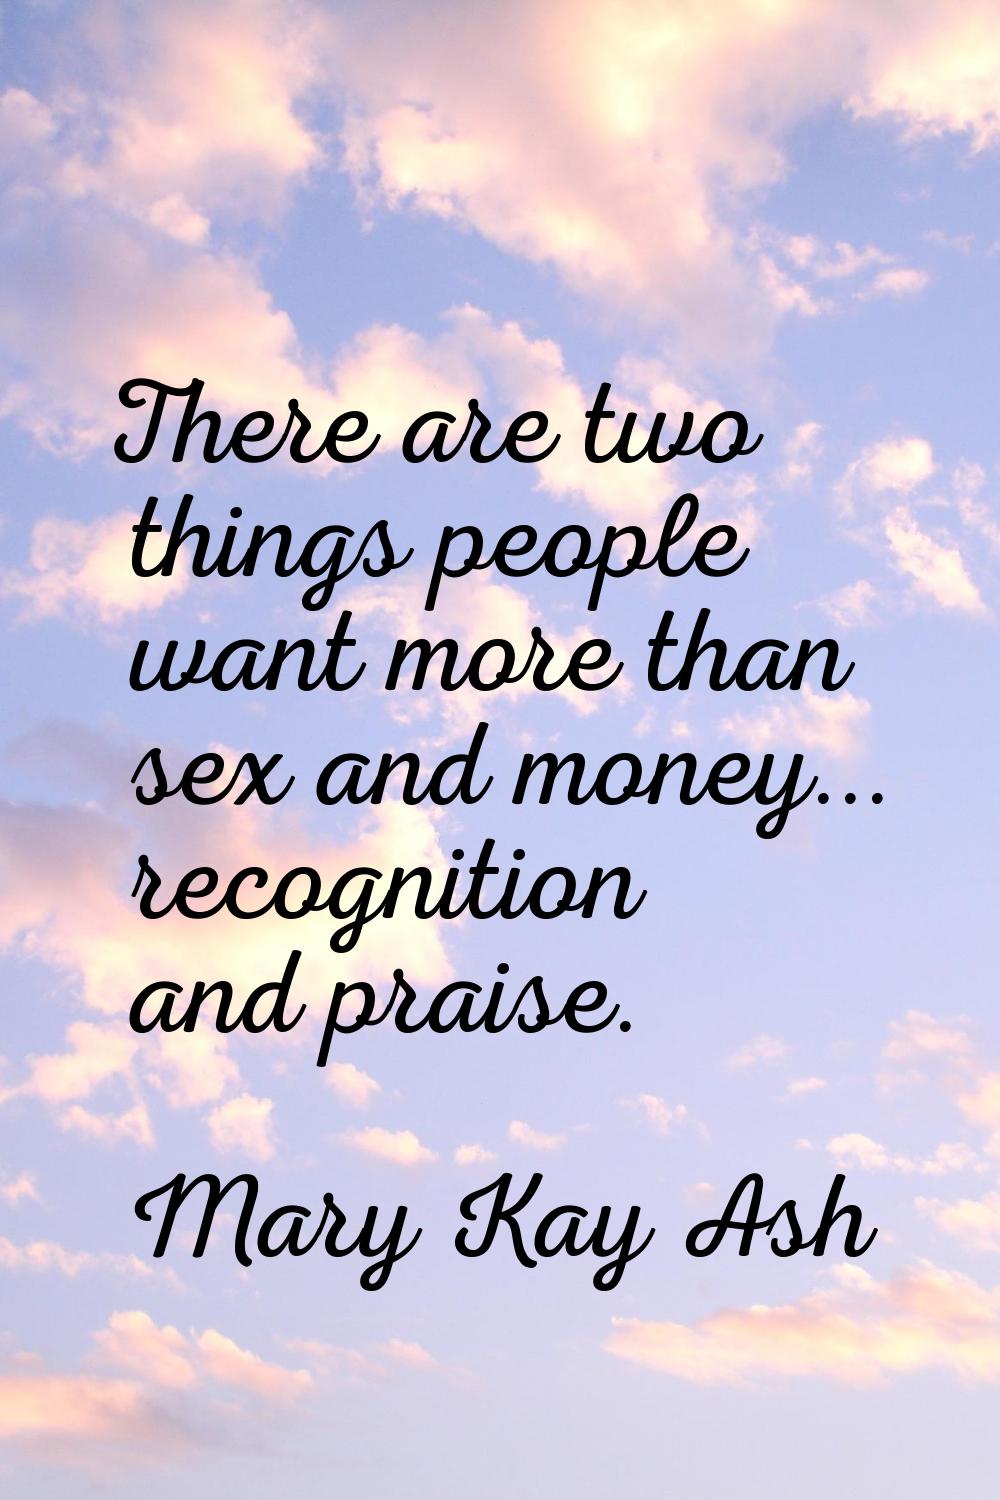 There are two things people want more than sex and money... recognition and praise.